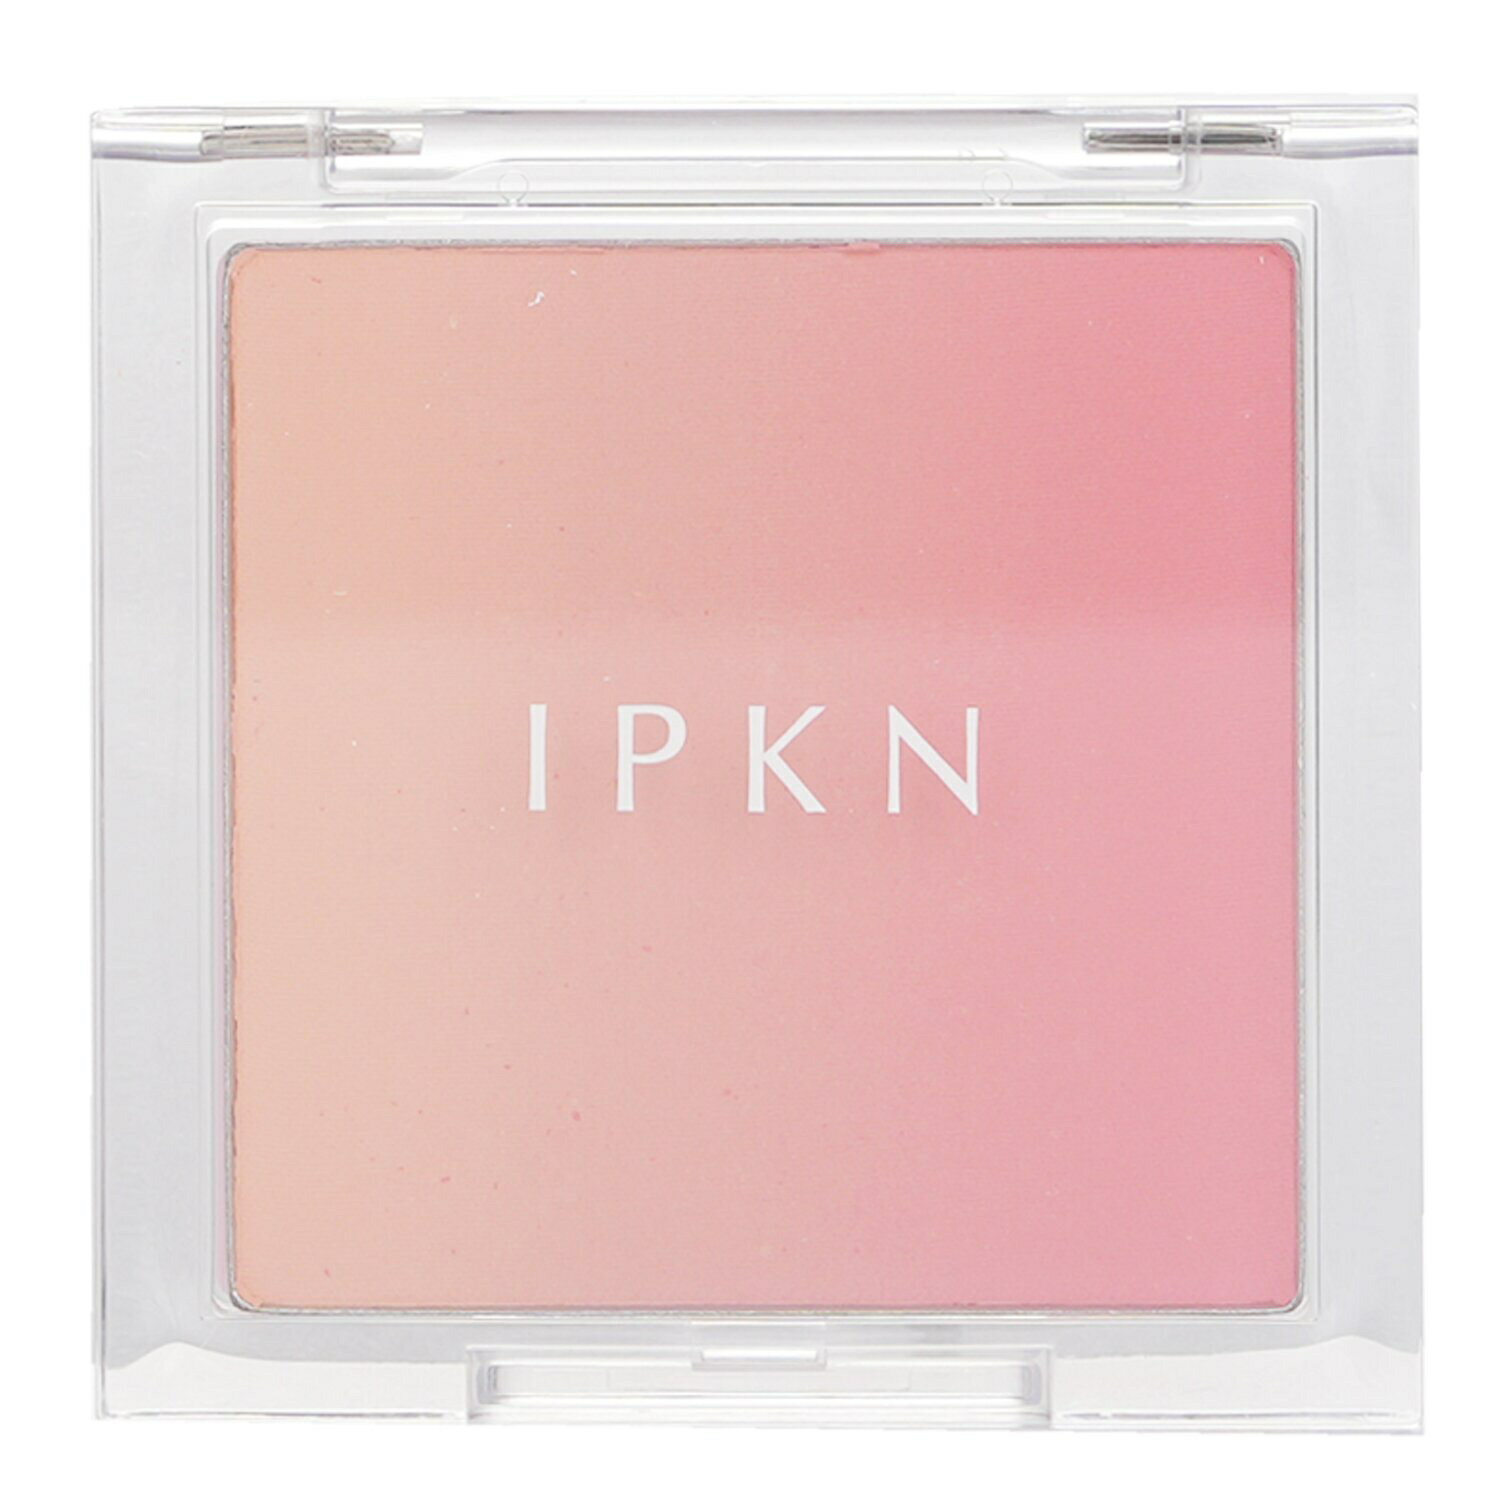 IPKN チーク Personal Mood Layering Blusher - # 01 Peach Drizzle 9.5g メイクアップ フェイス 母の..